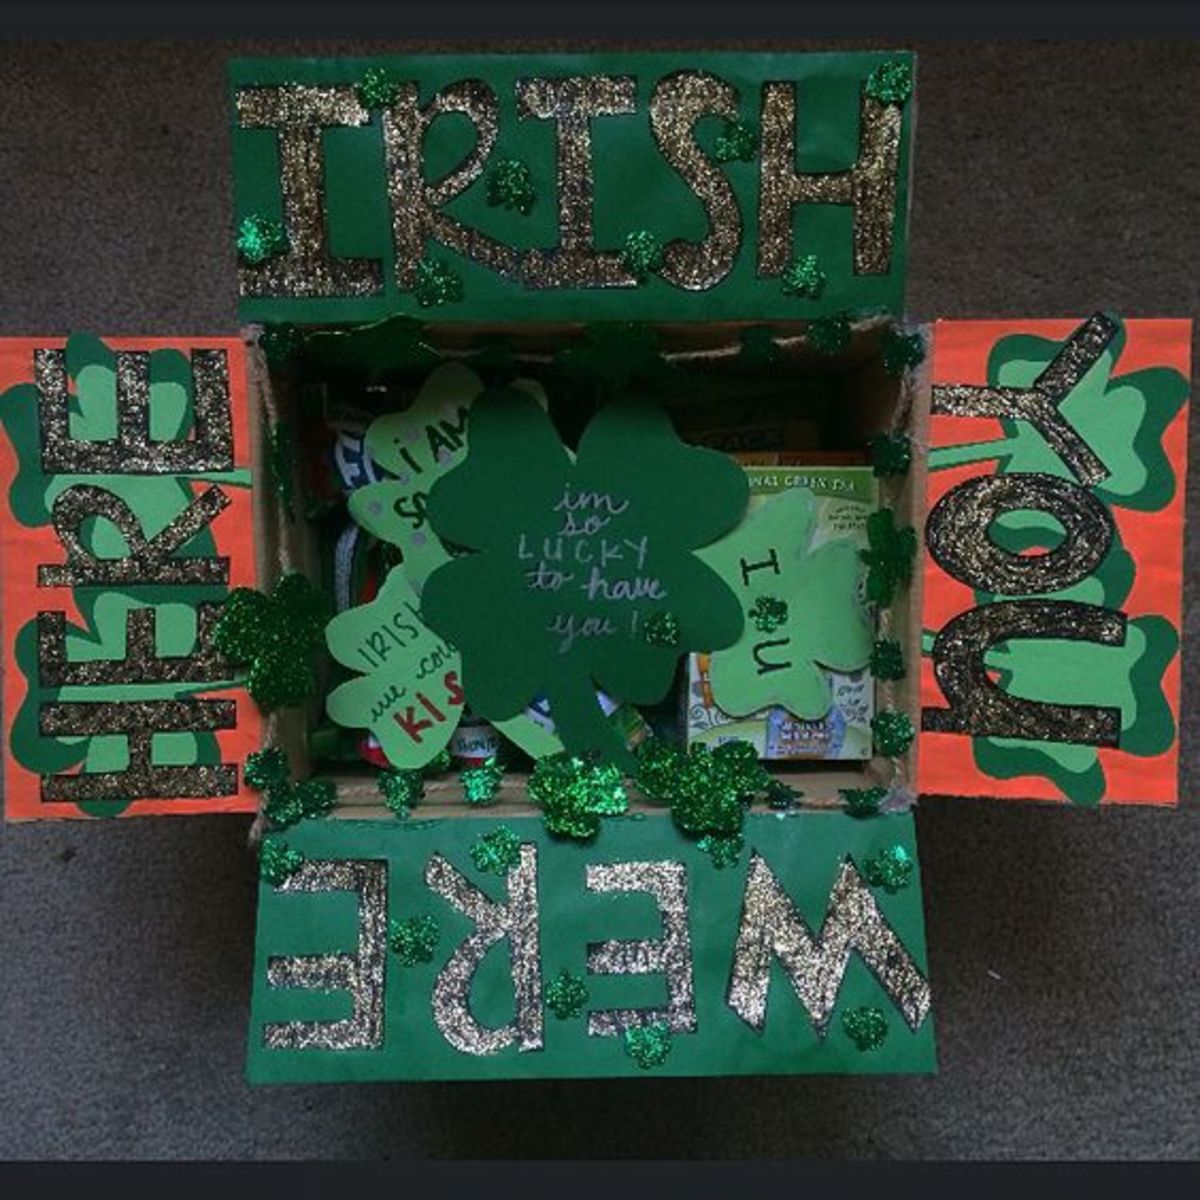 st-patricks-day-care-package-ideas